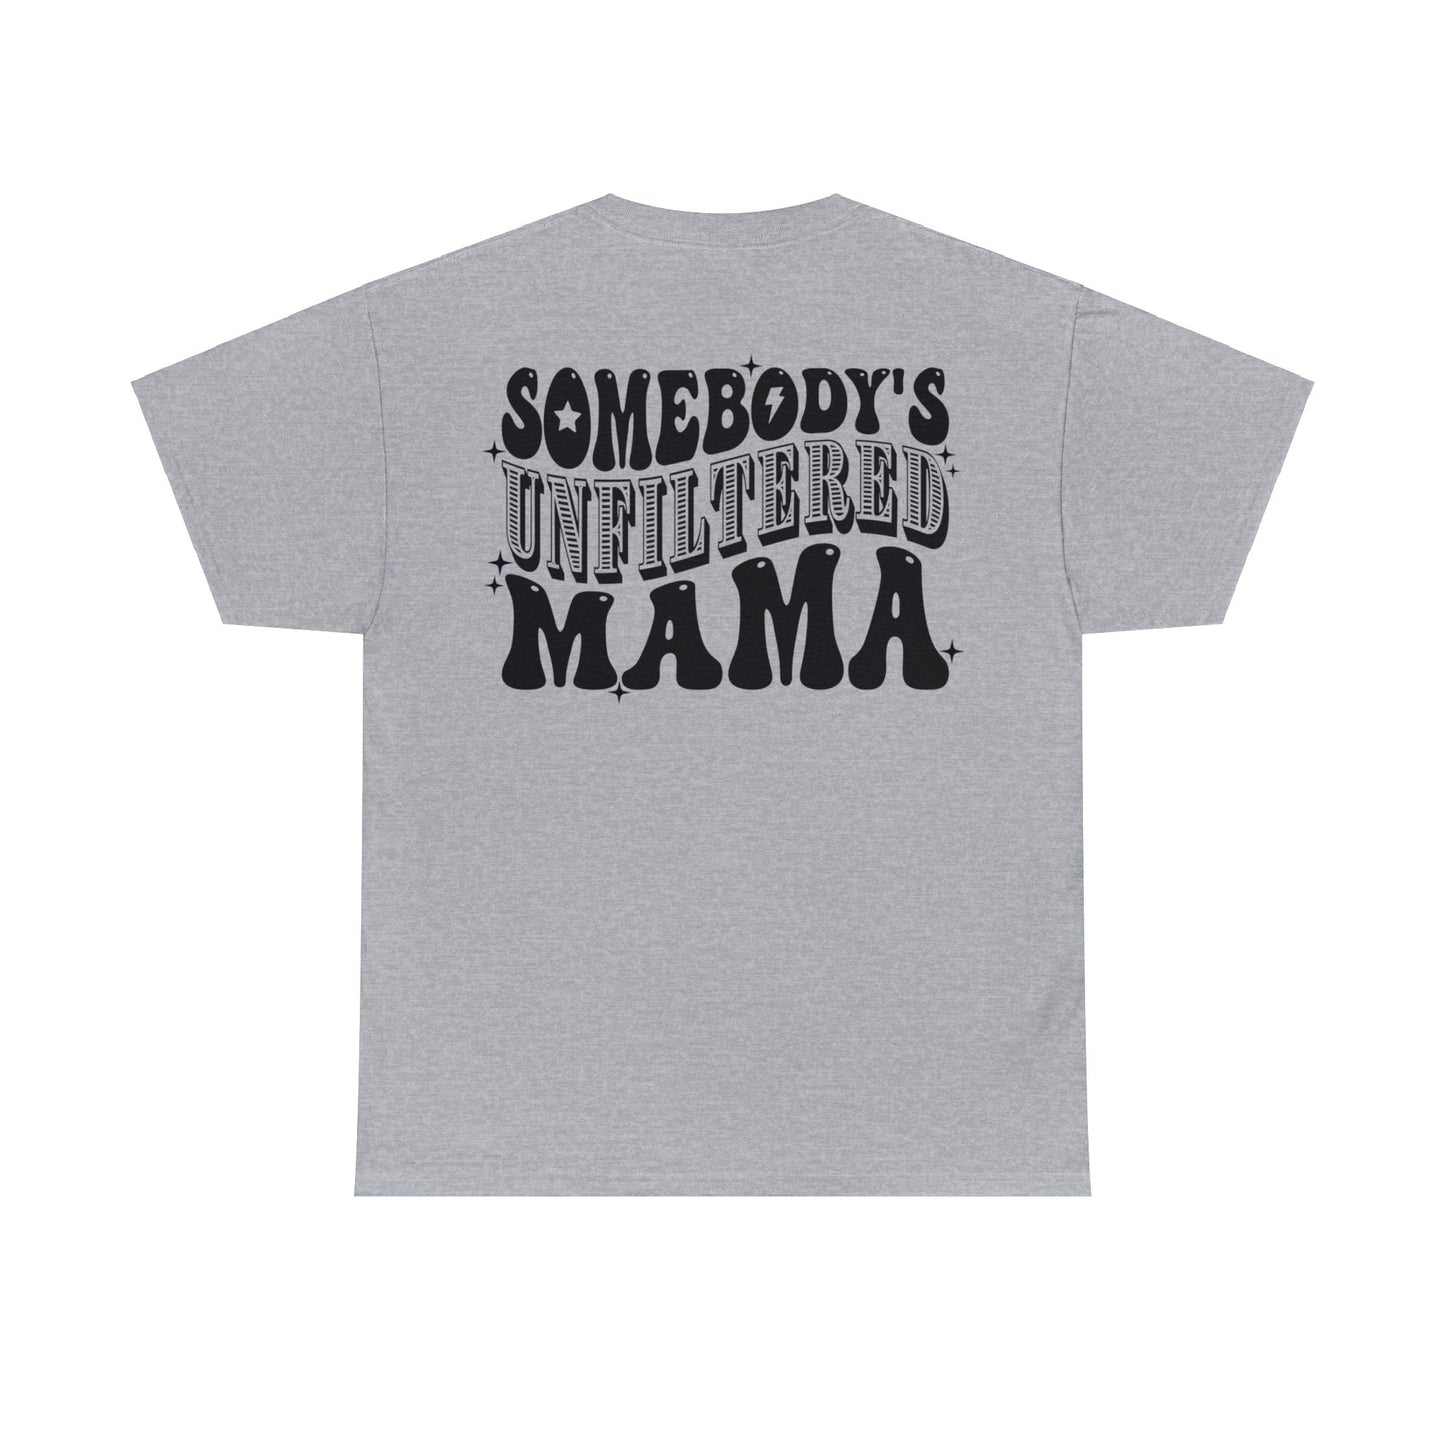 Somebody's Unfiltered Mama (front & back) - Unisex T-shirt